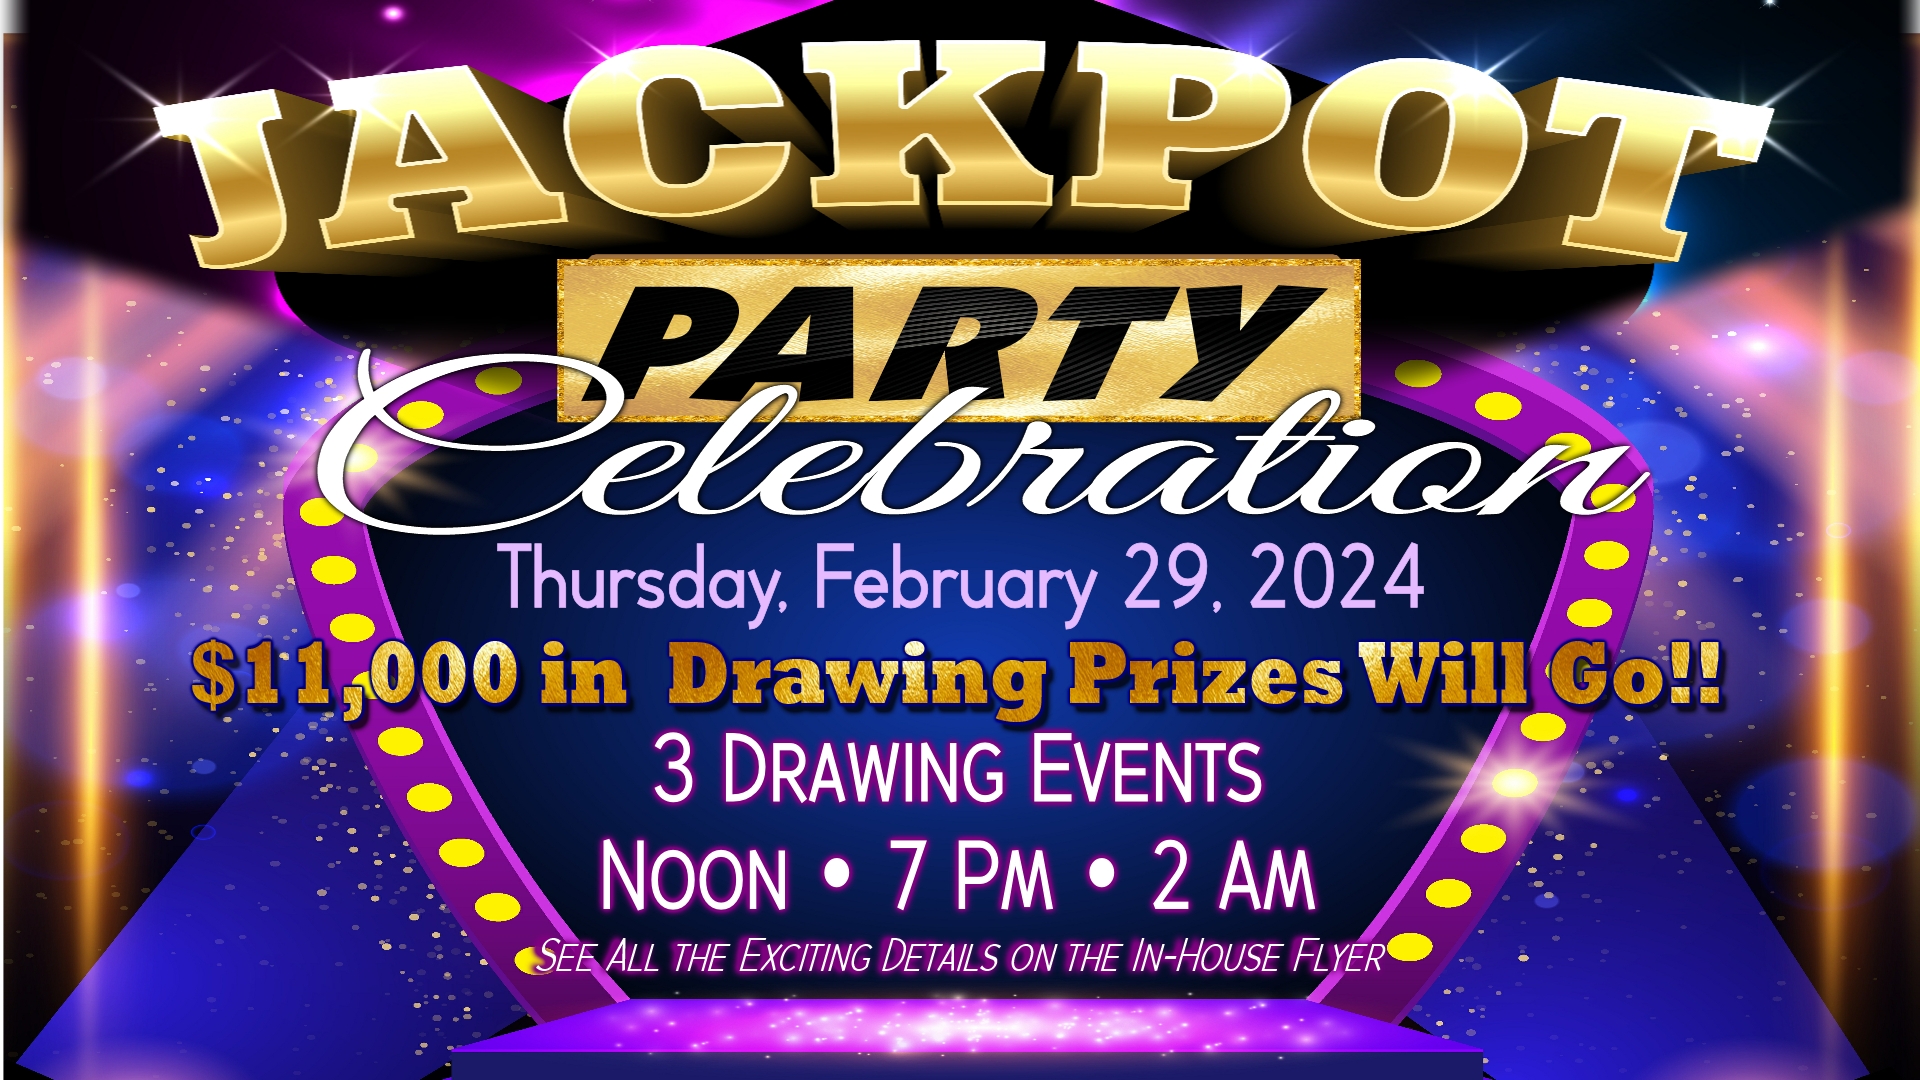 Jackpot Winners Can Join Us For A Jackpot Party On Thursday February 29th At BJ's Bingo And Gaming